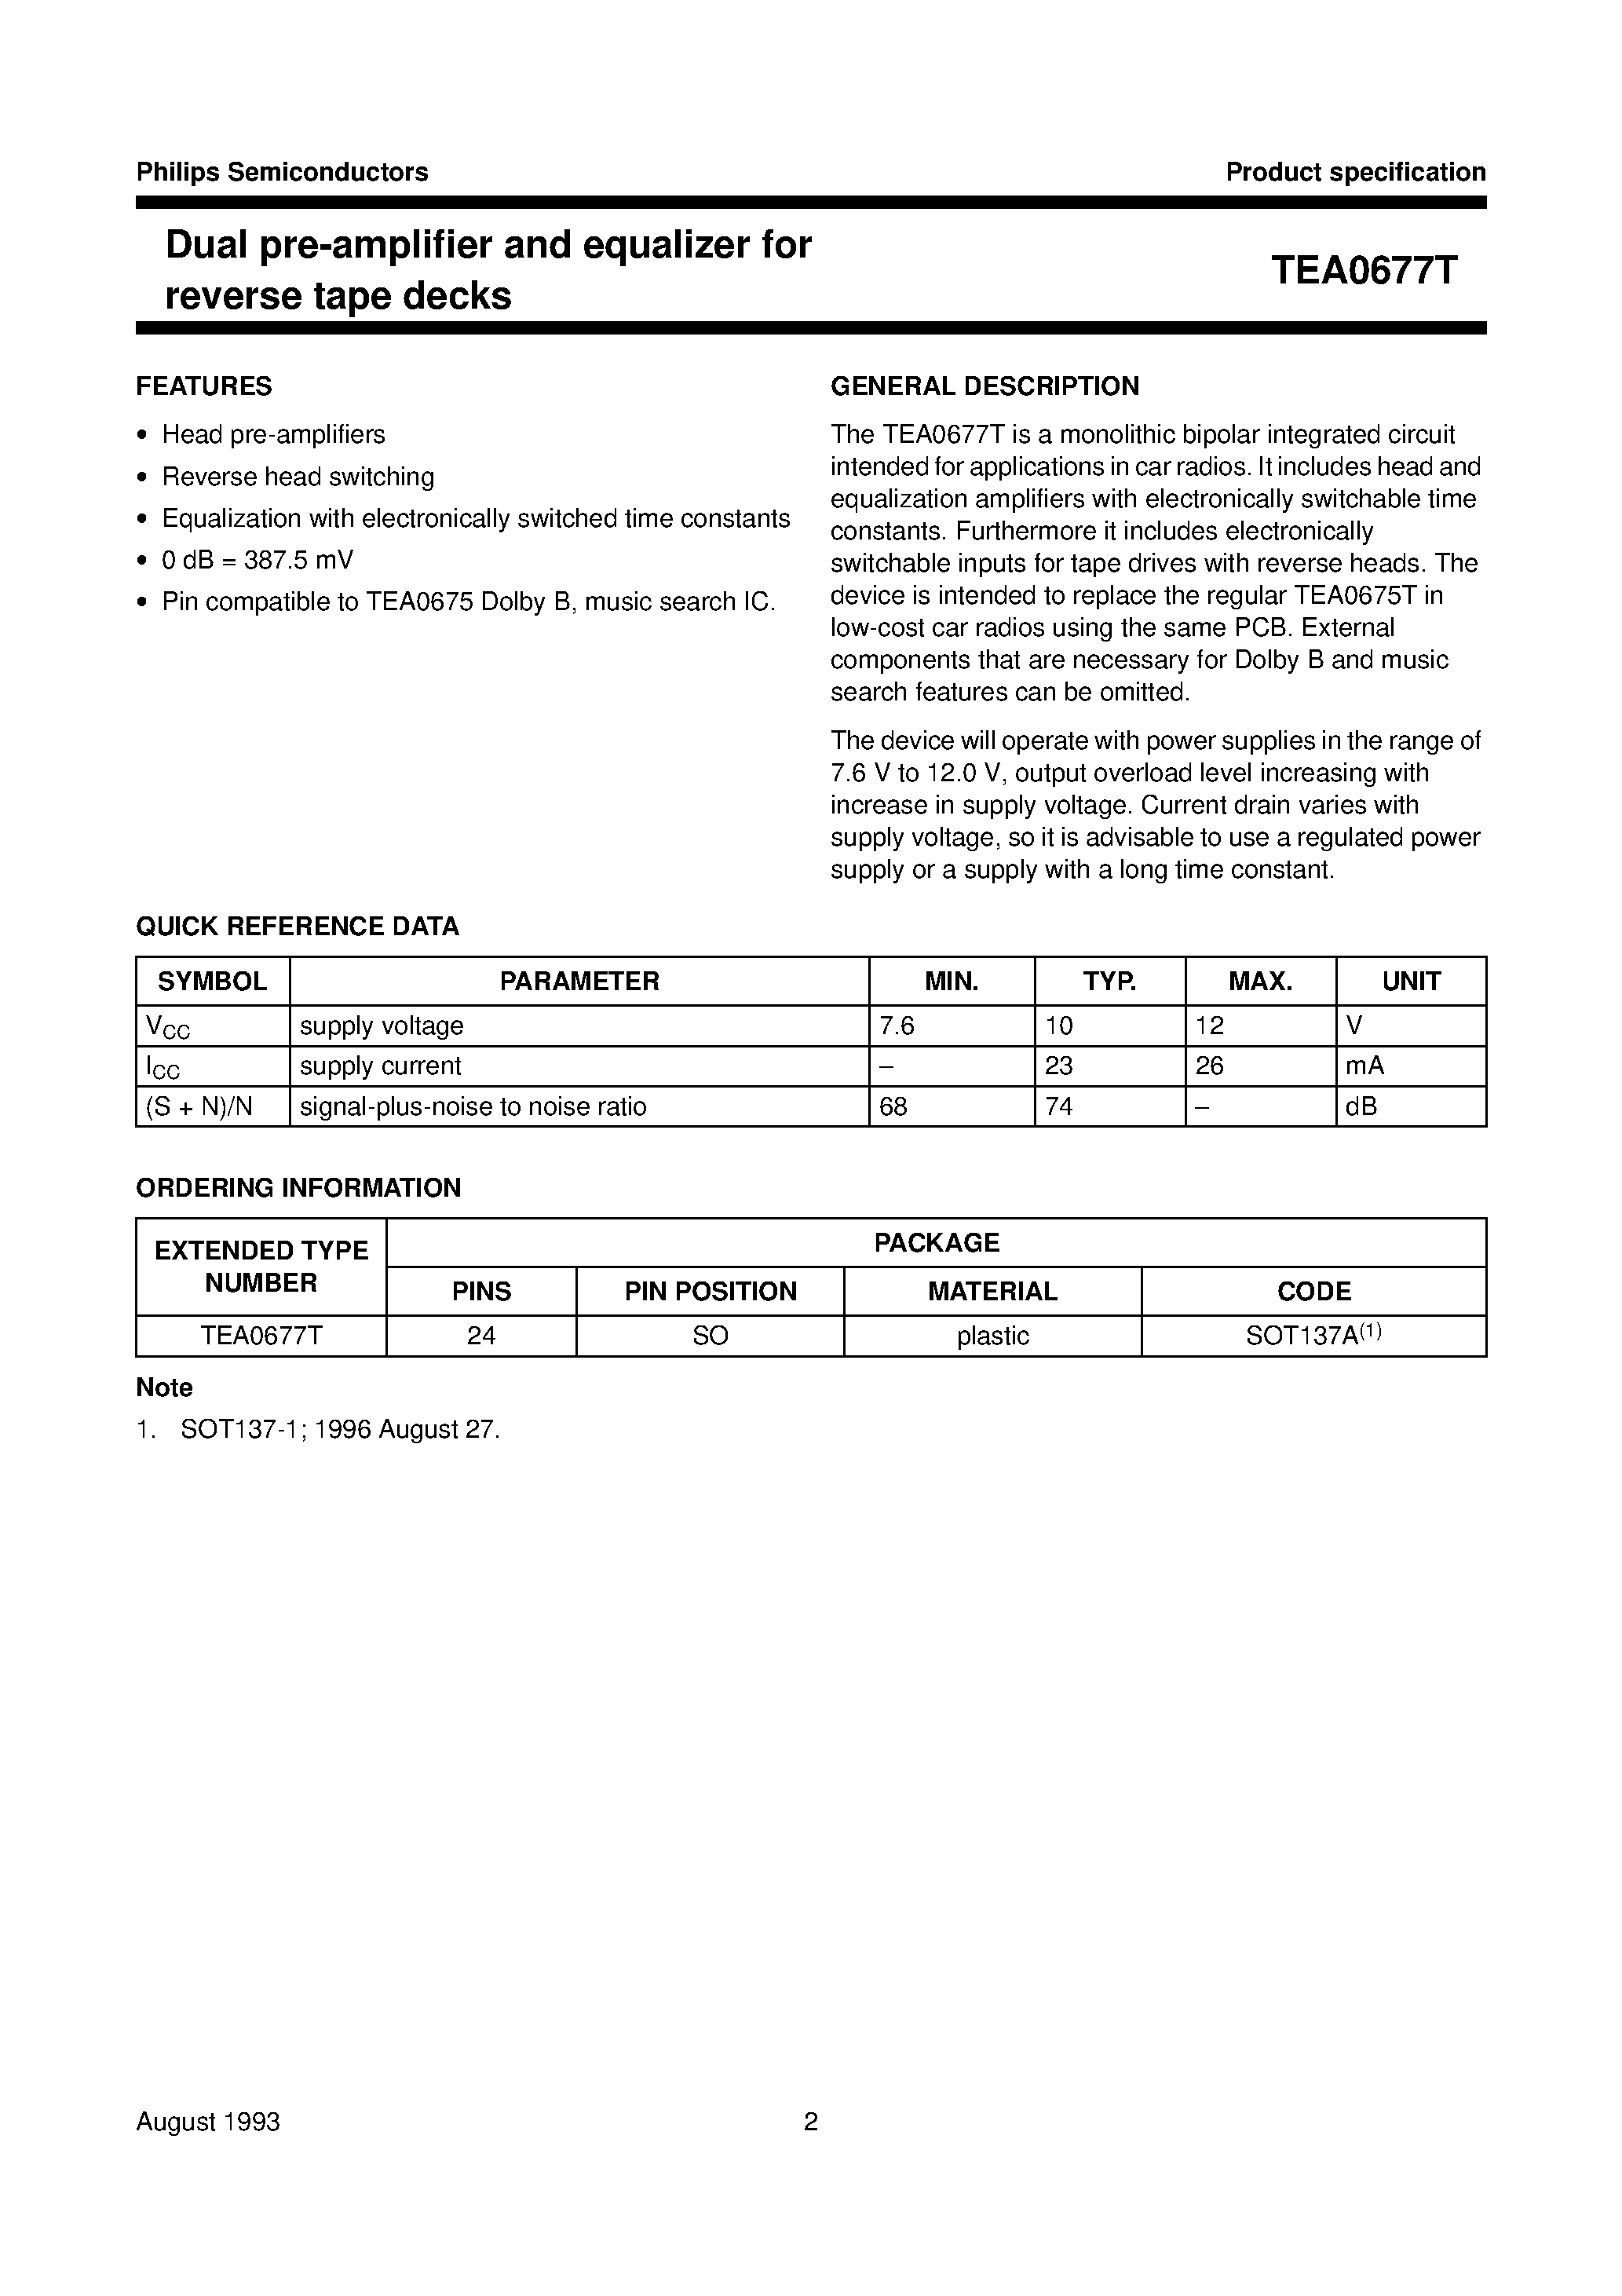 Datasheet TEA0677T - Dual pre-amplifier and equalizer for reverse tape decks page 2